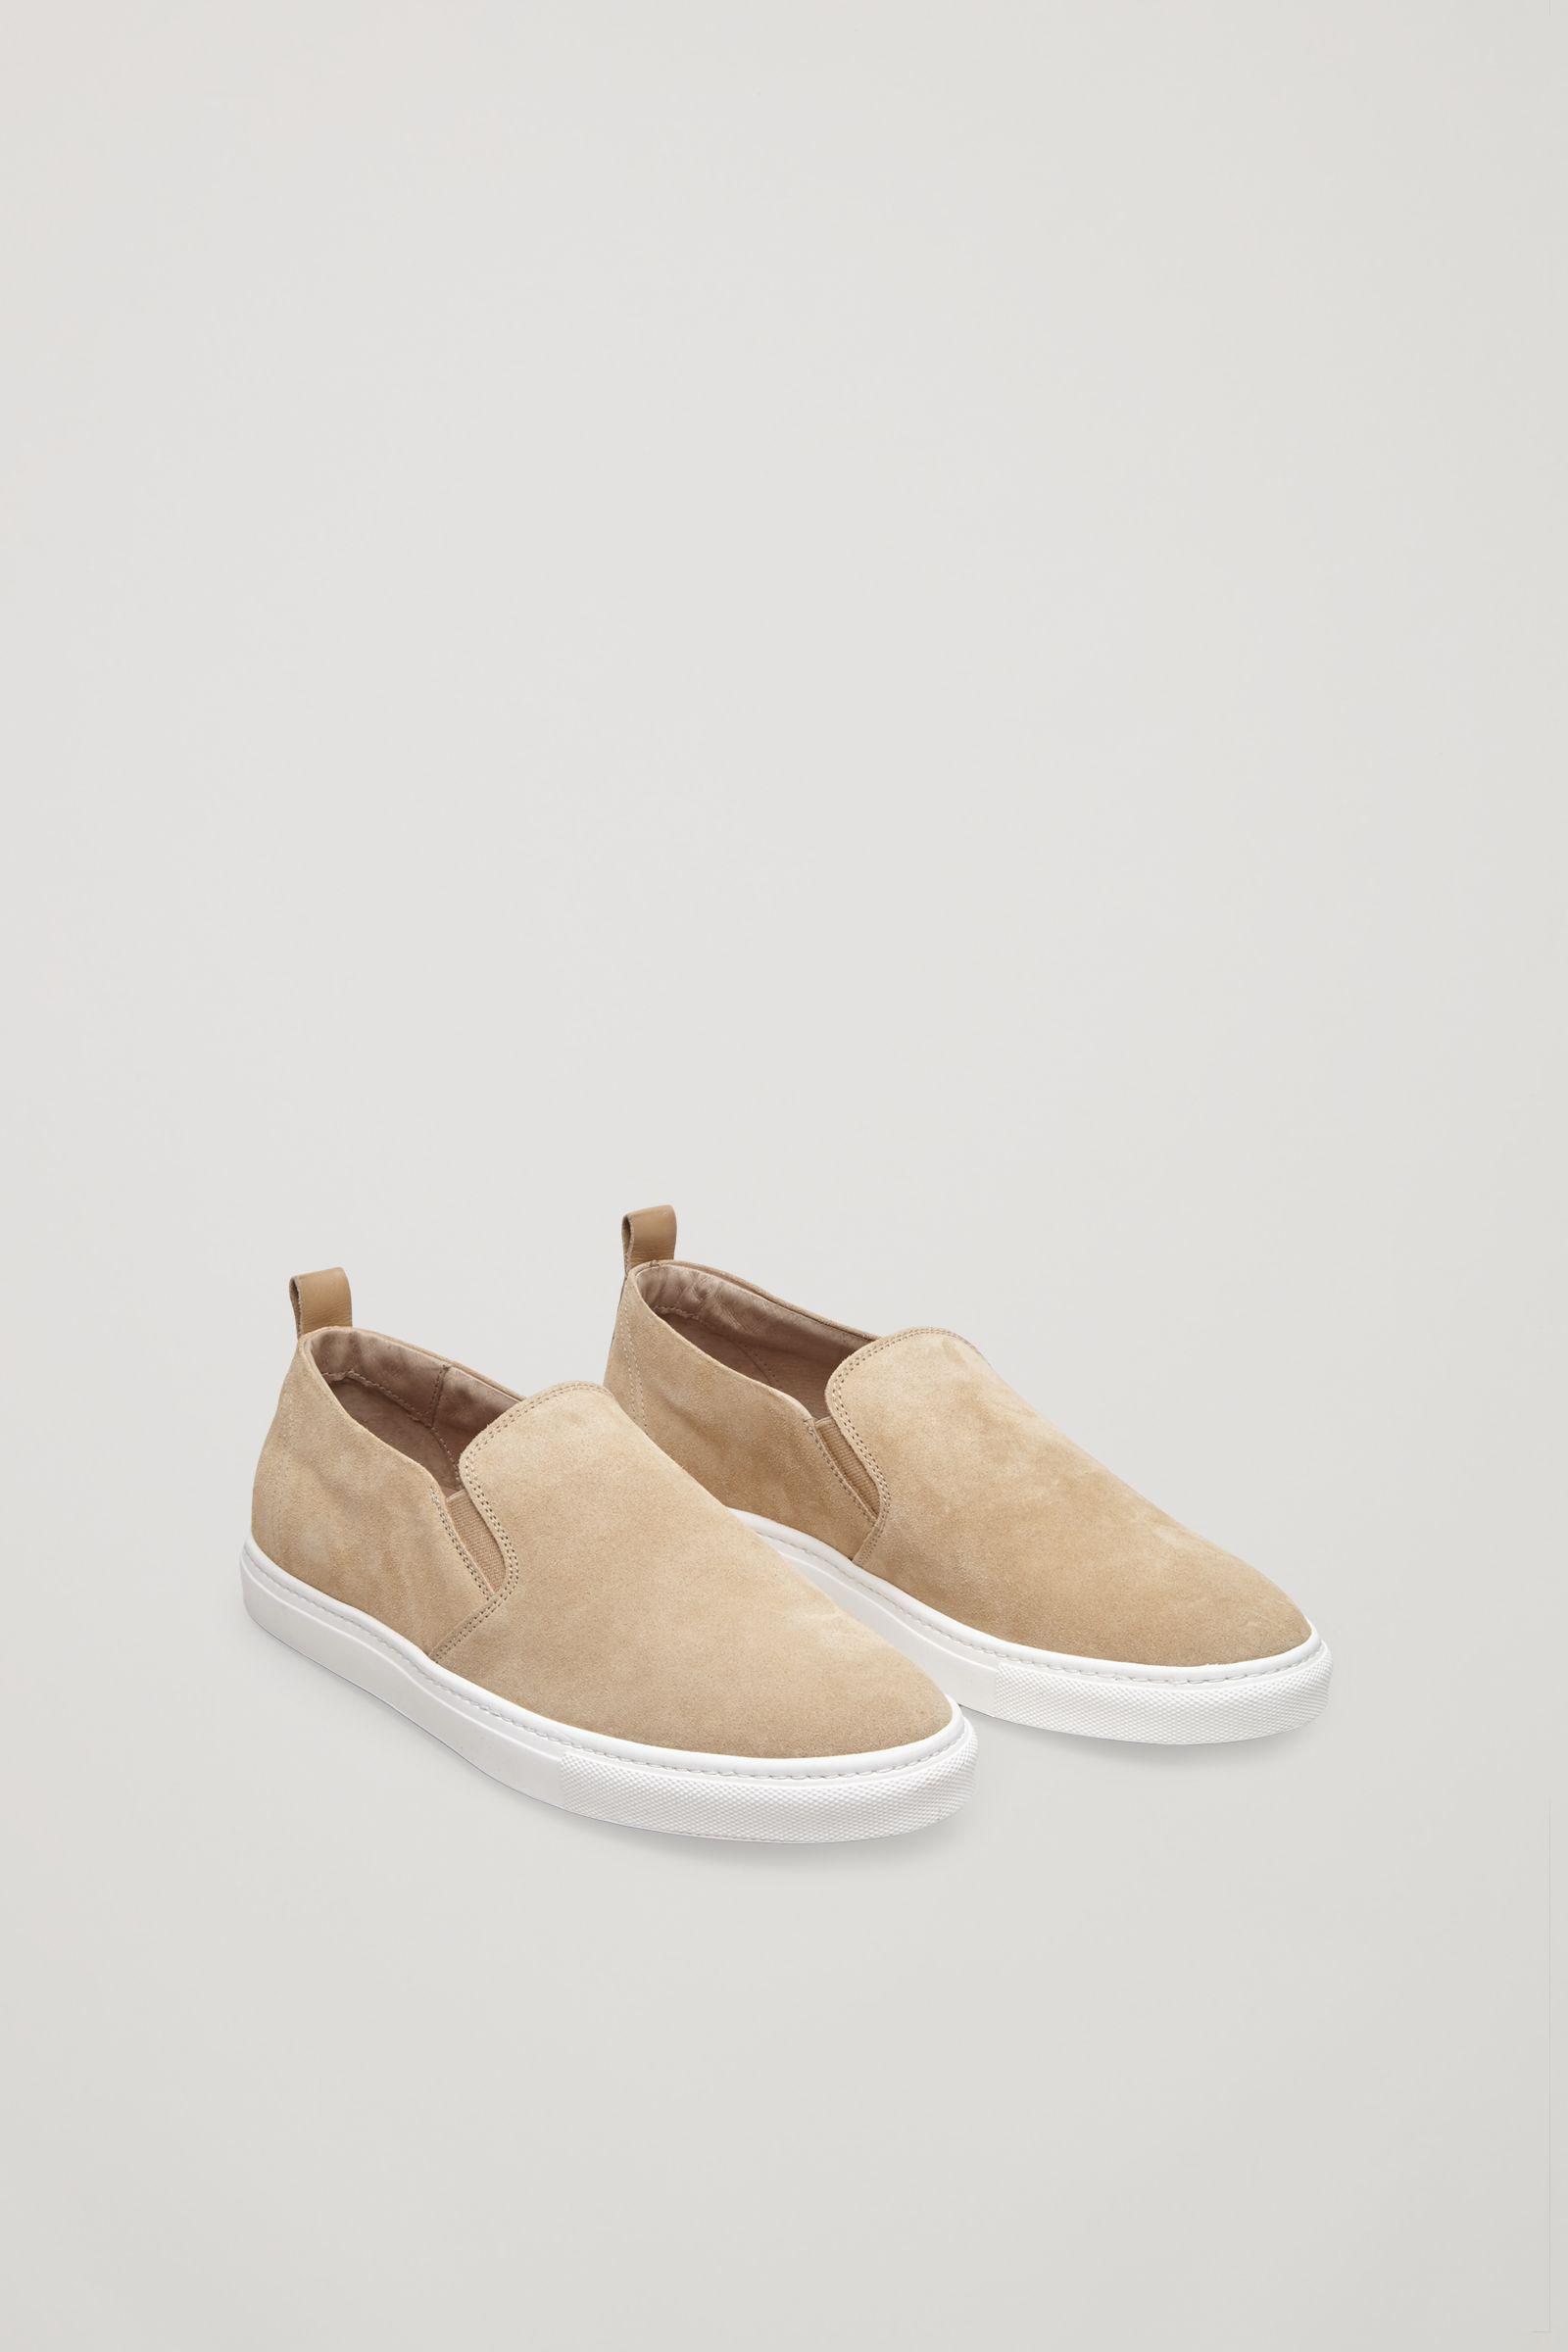 COS Suede Slip-on Sneakers in Natural for Men | Lyst